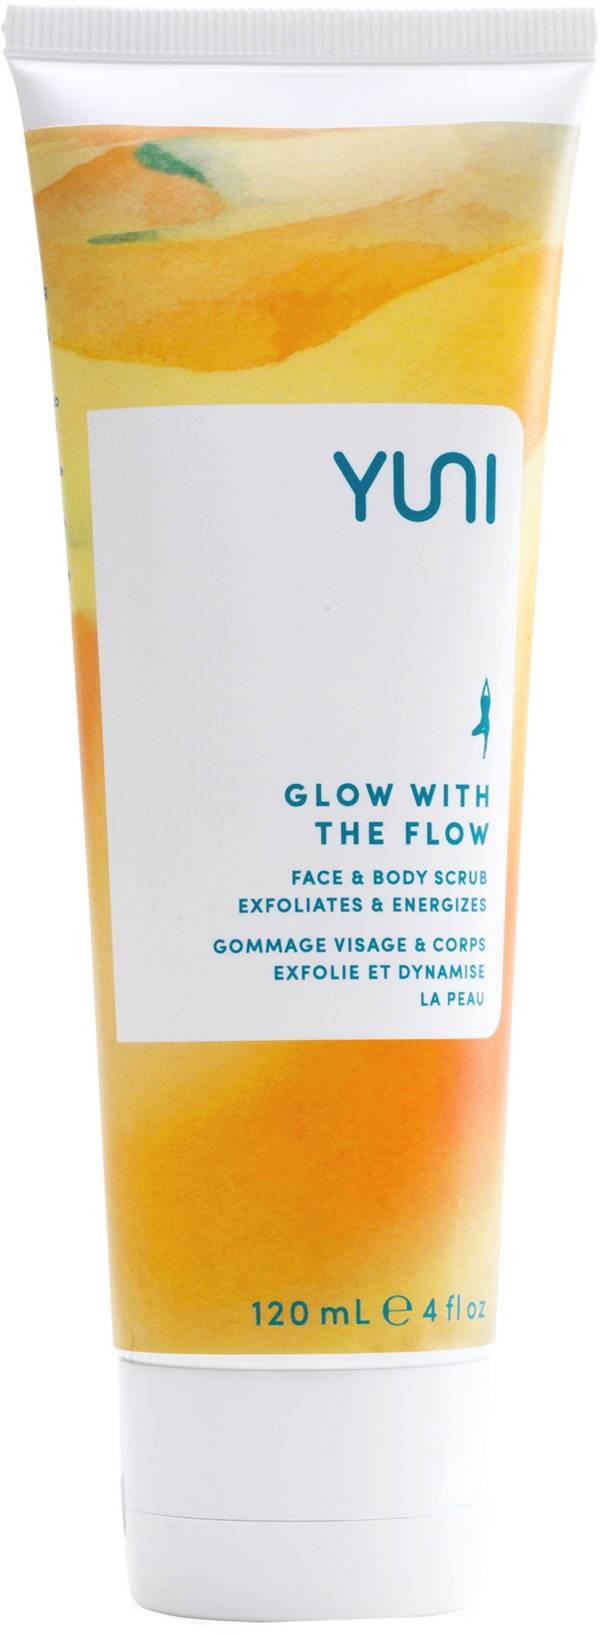 YUNI Beauty Go With The Flow Face and Body Scrub product image